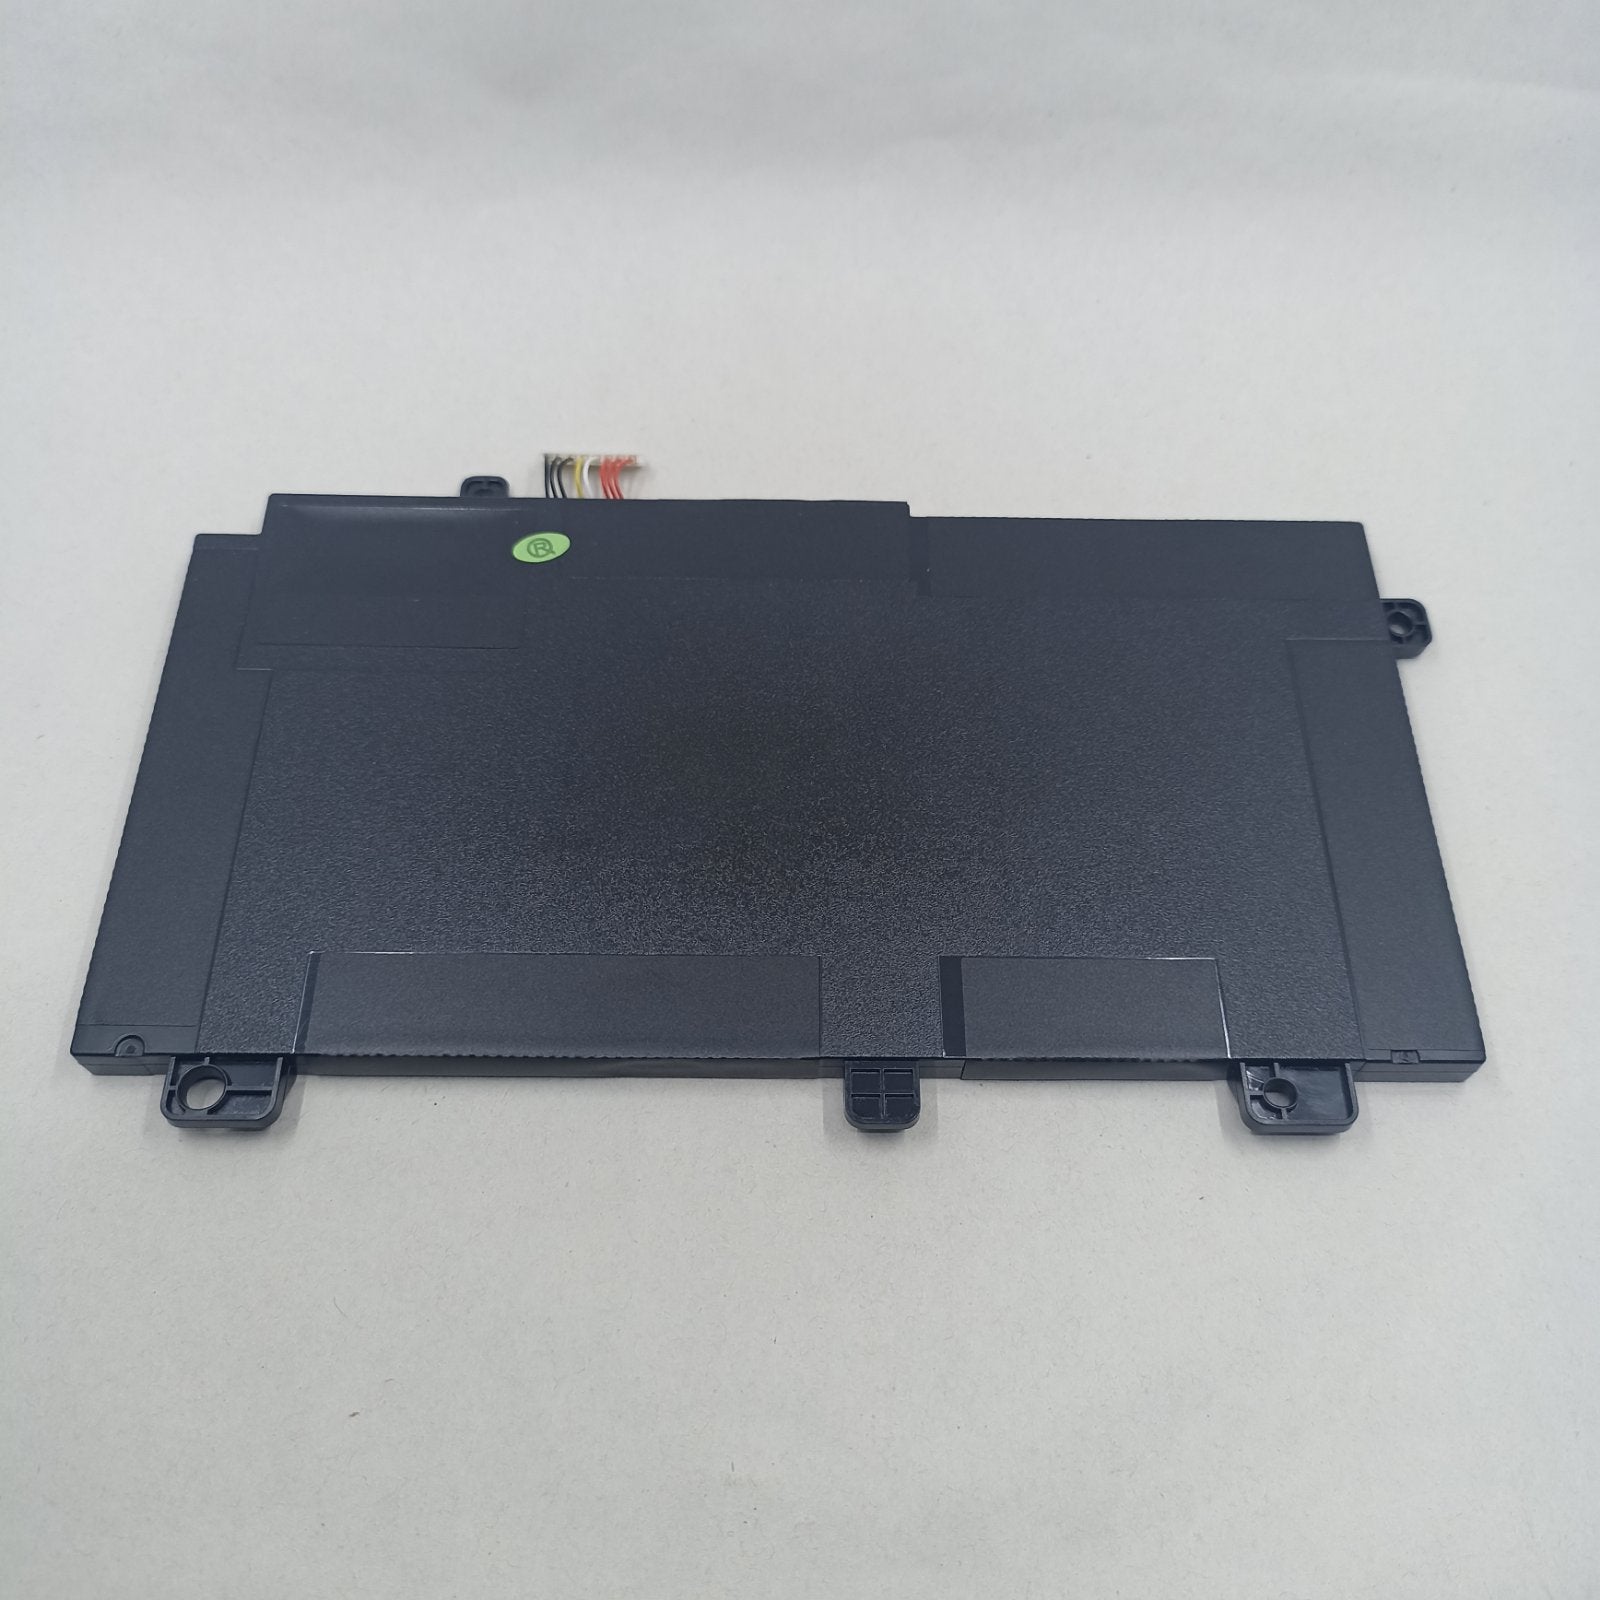 Replacement Battery for Asus FX506LI A1